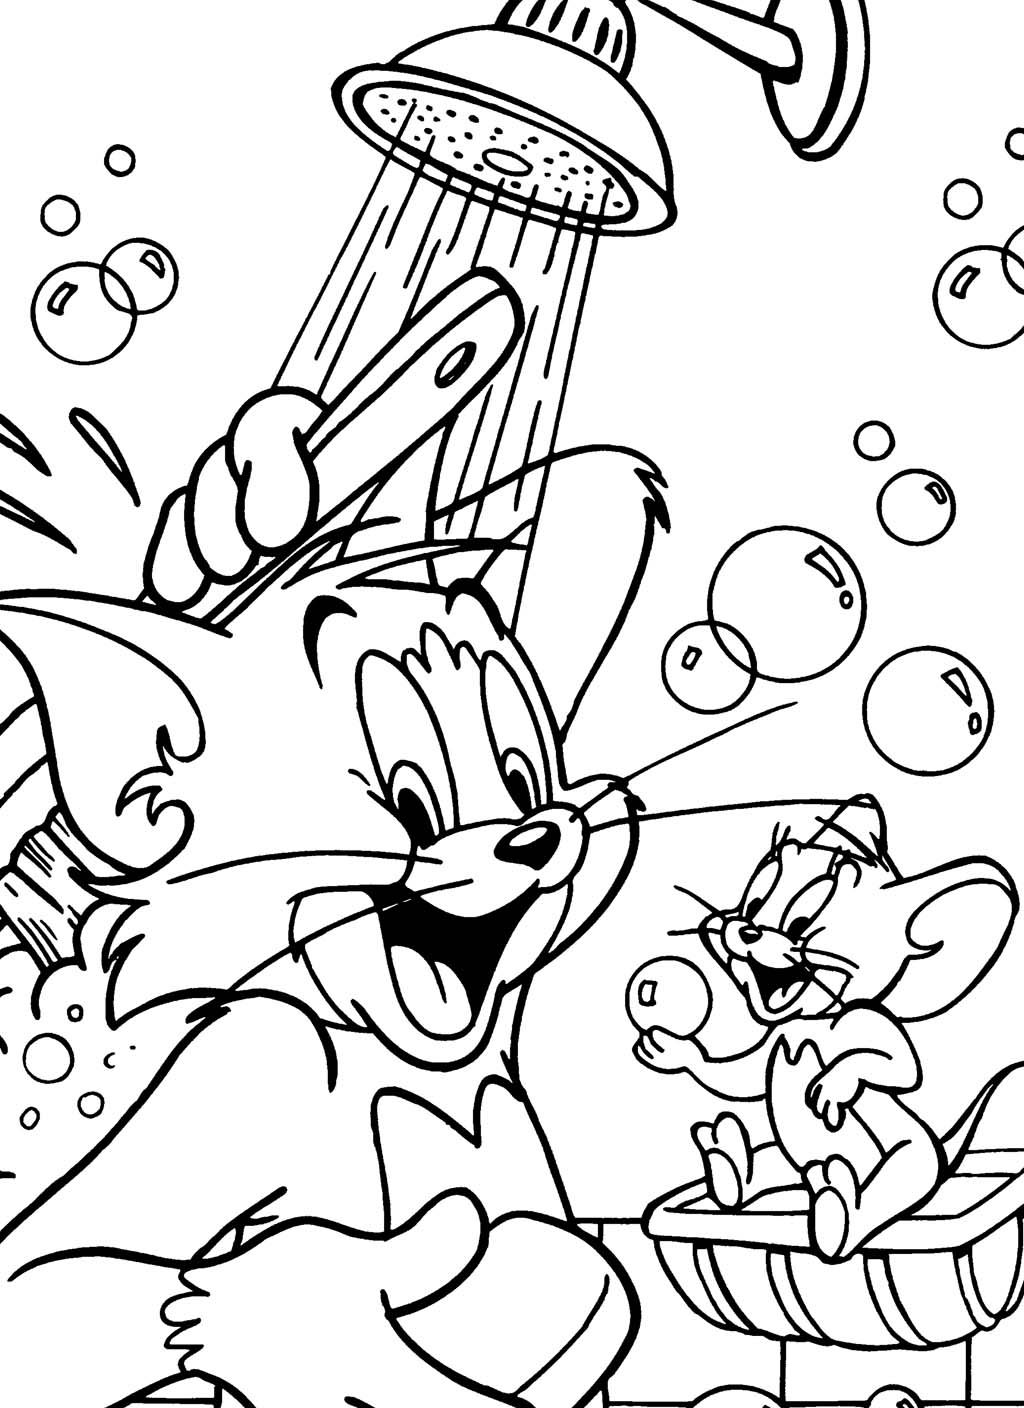 Tom N Jerry Colouring Pages - Coloring Pages Now